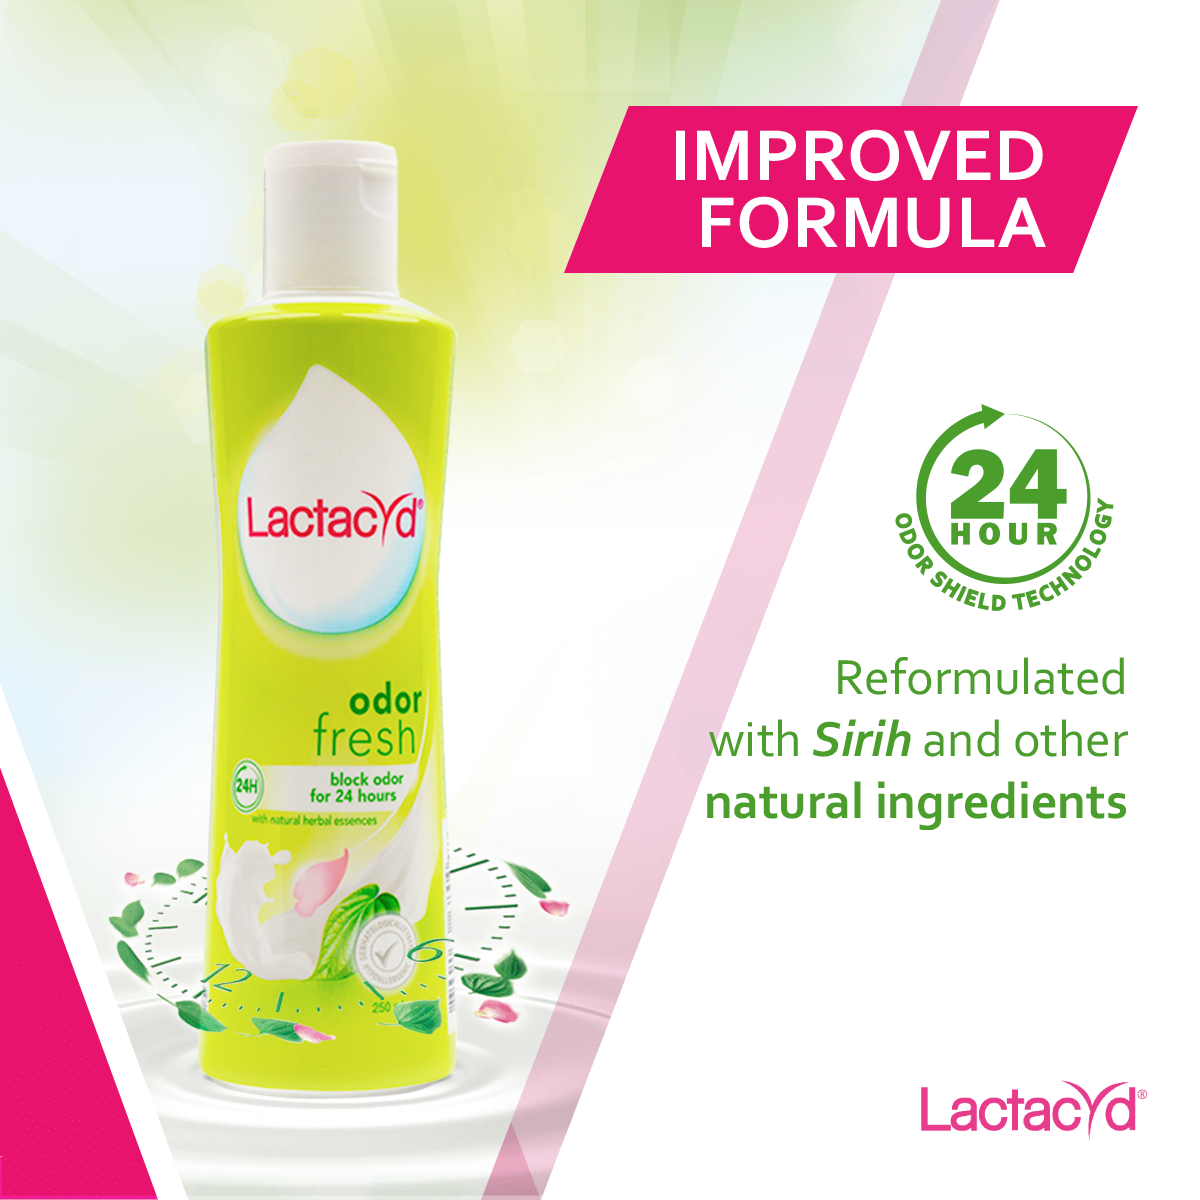 Improved Formula - Reformulated with Sirih and other natural ingredients